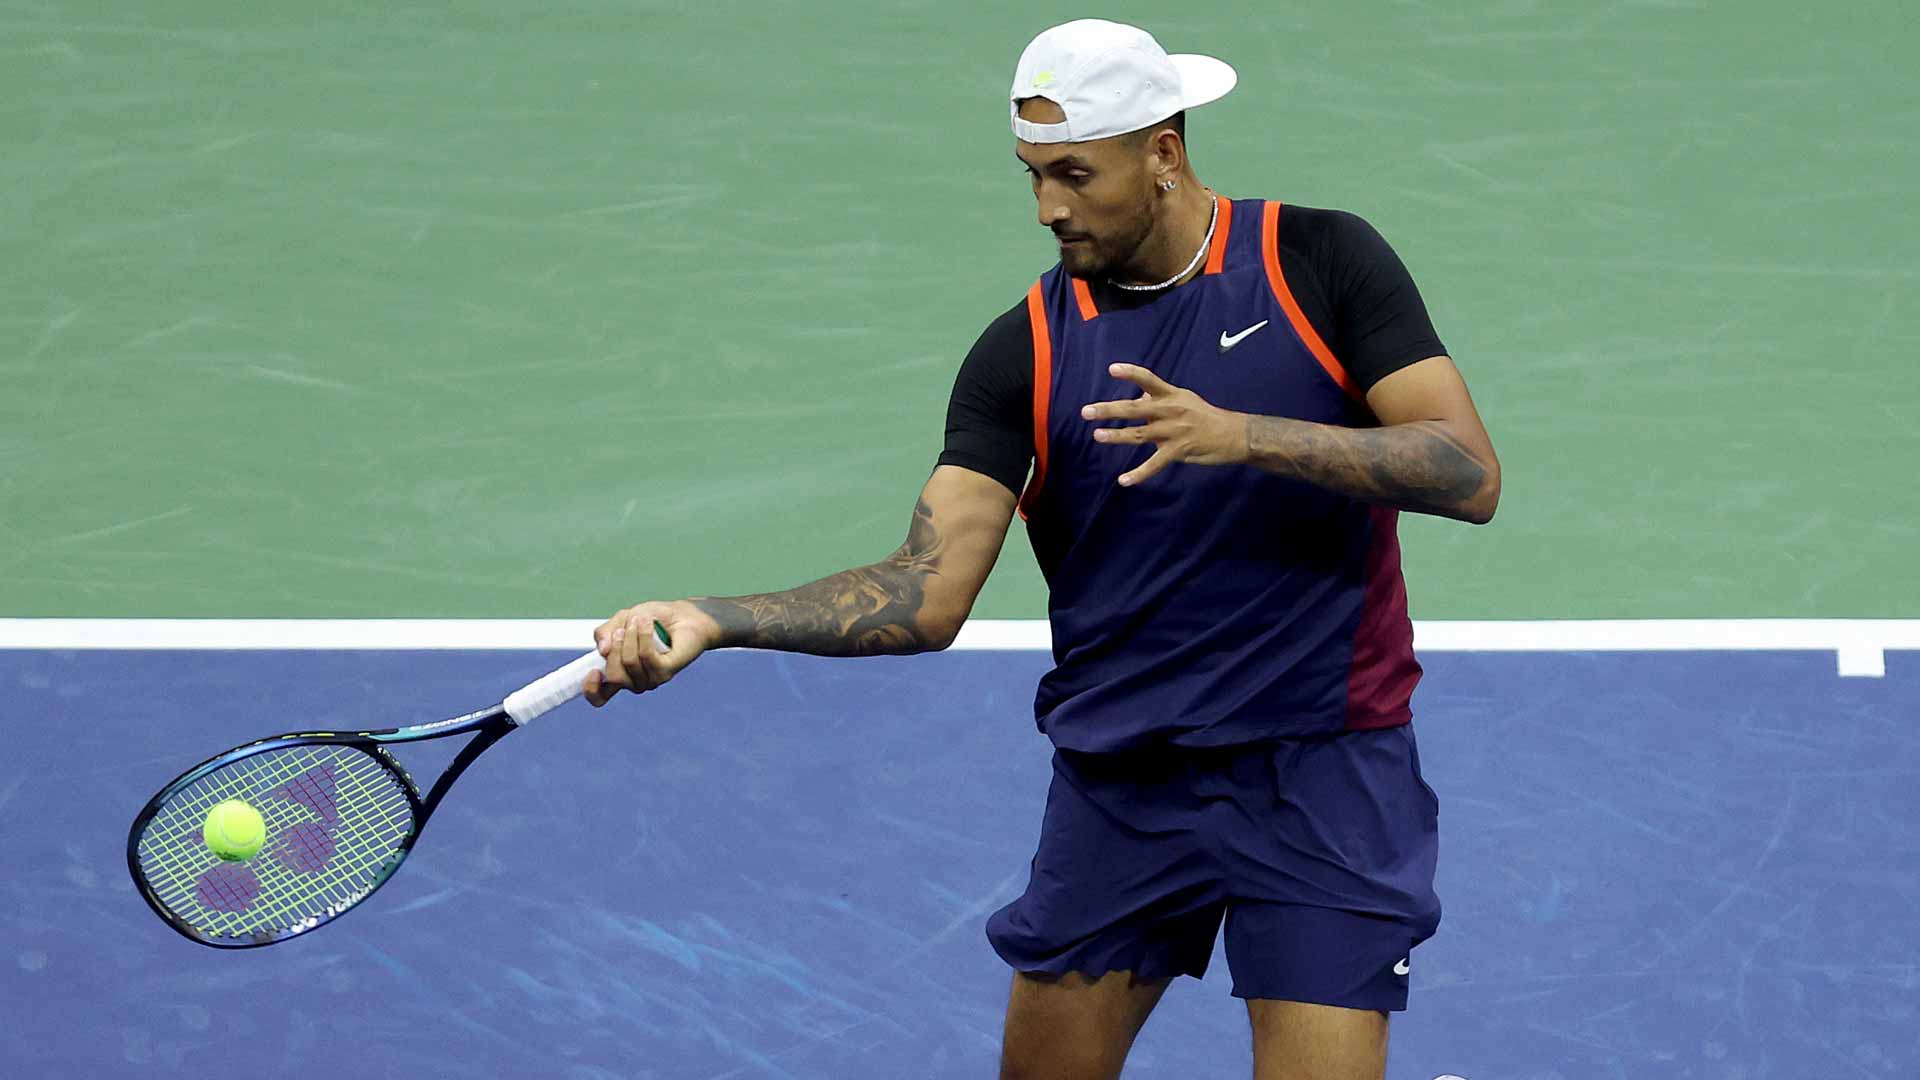 Nick Kyrgios was a quarter-finalist at last year's US Open.